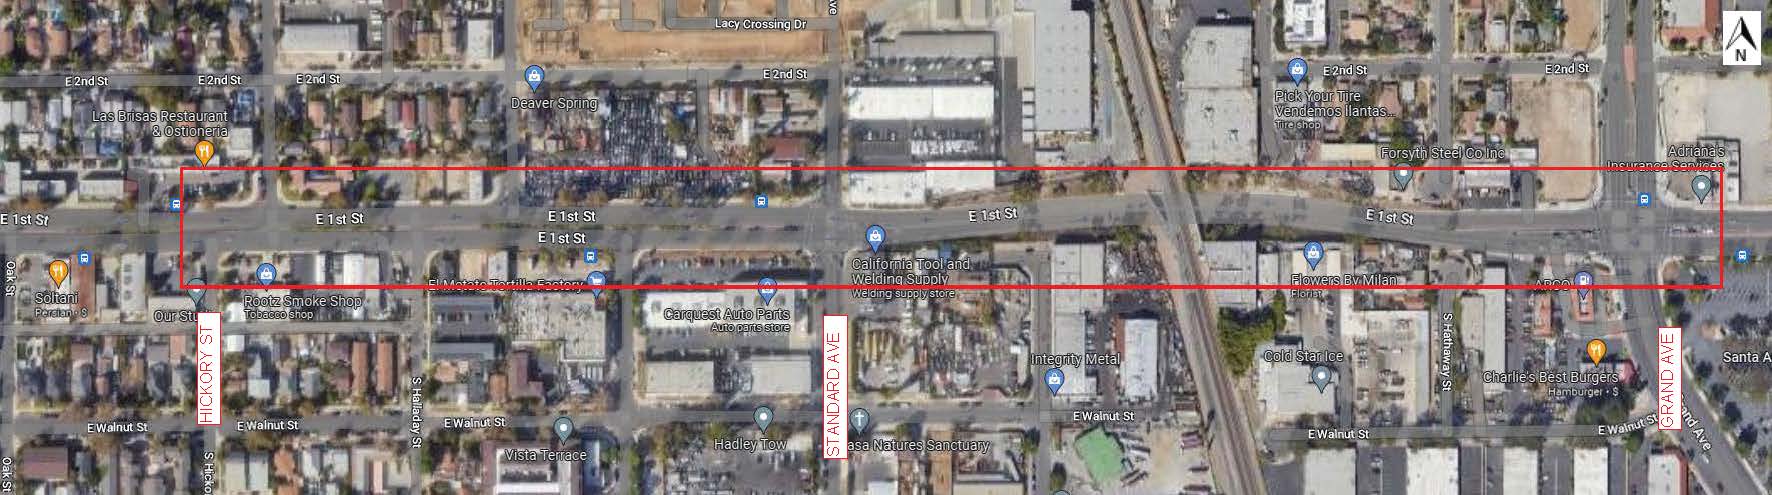 map of reduced lanes on First Street